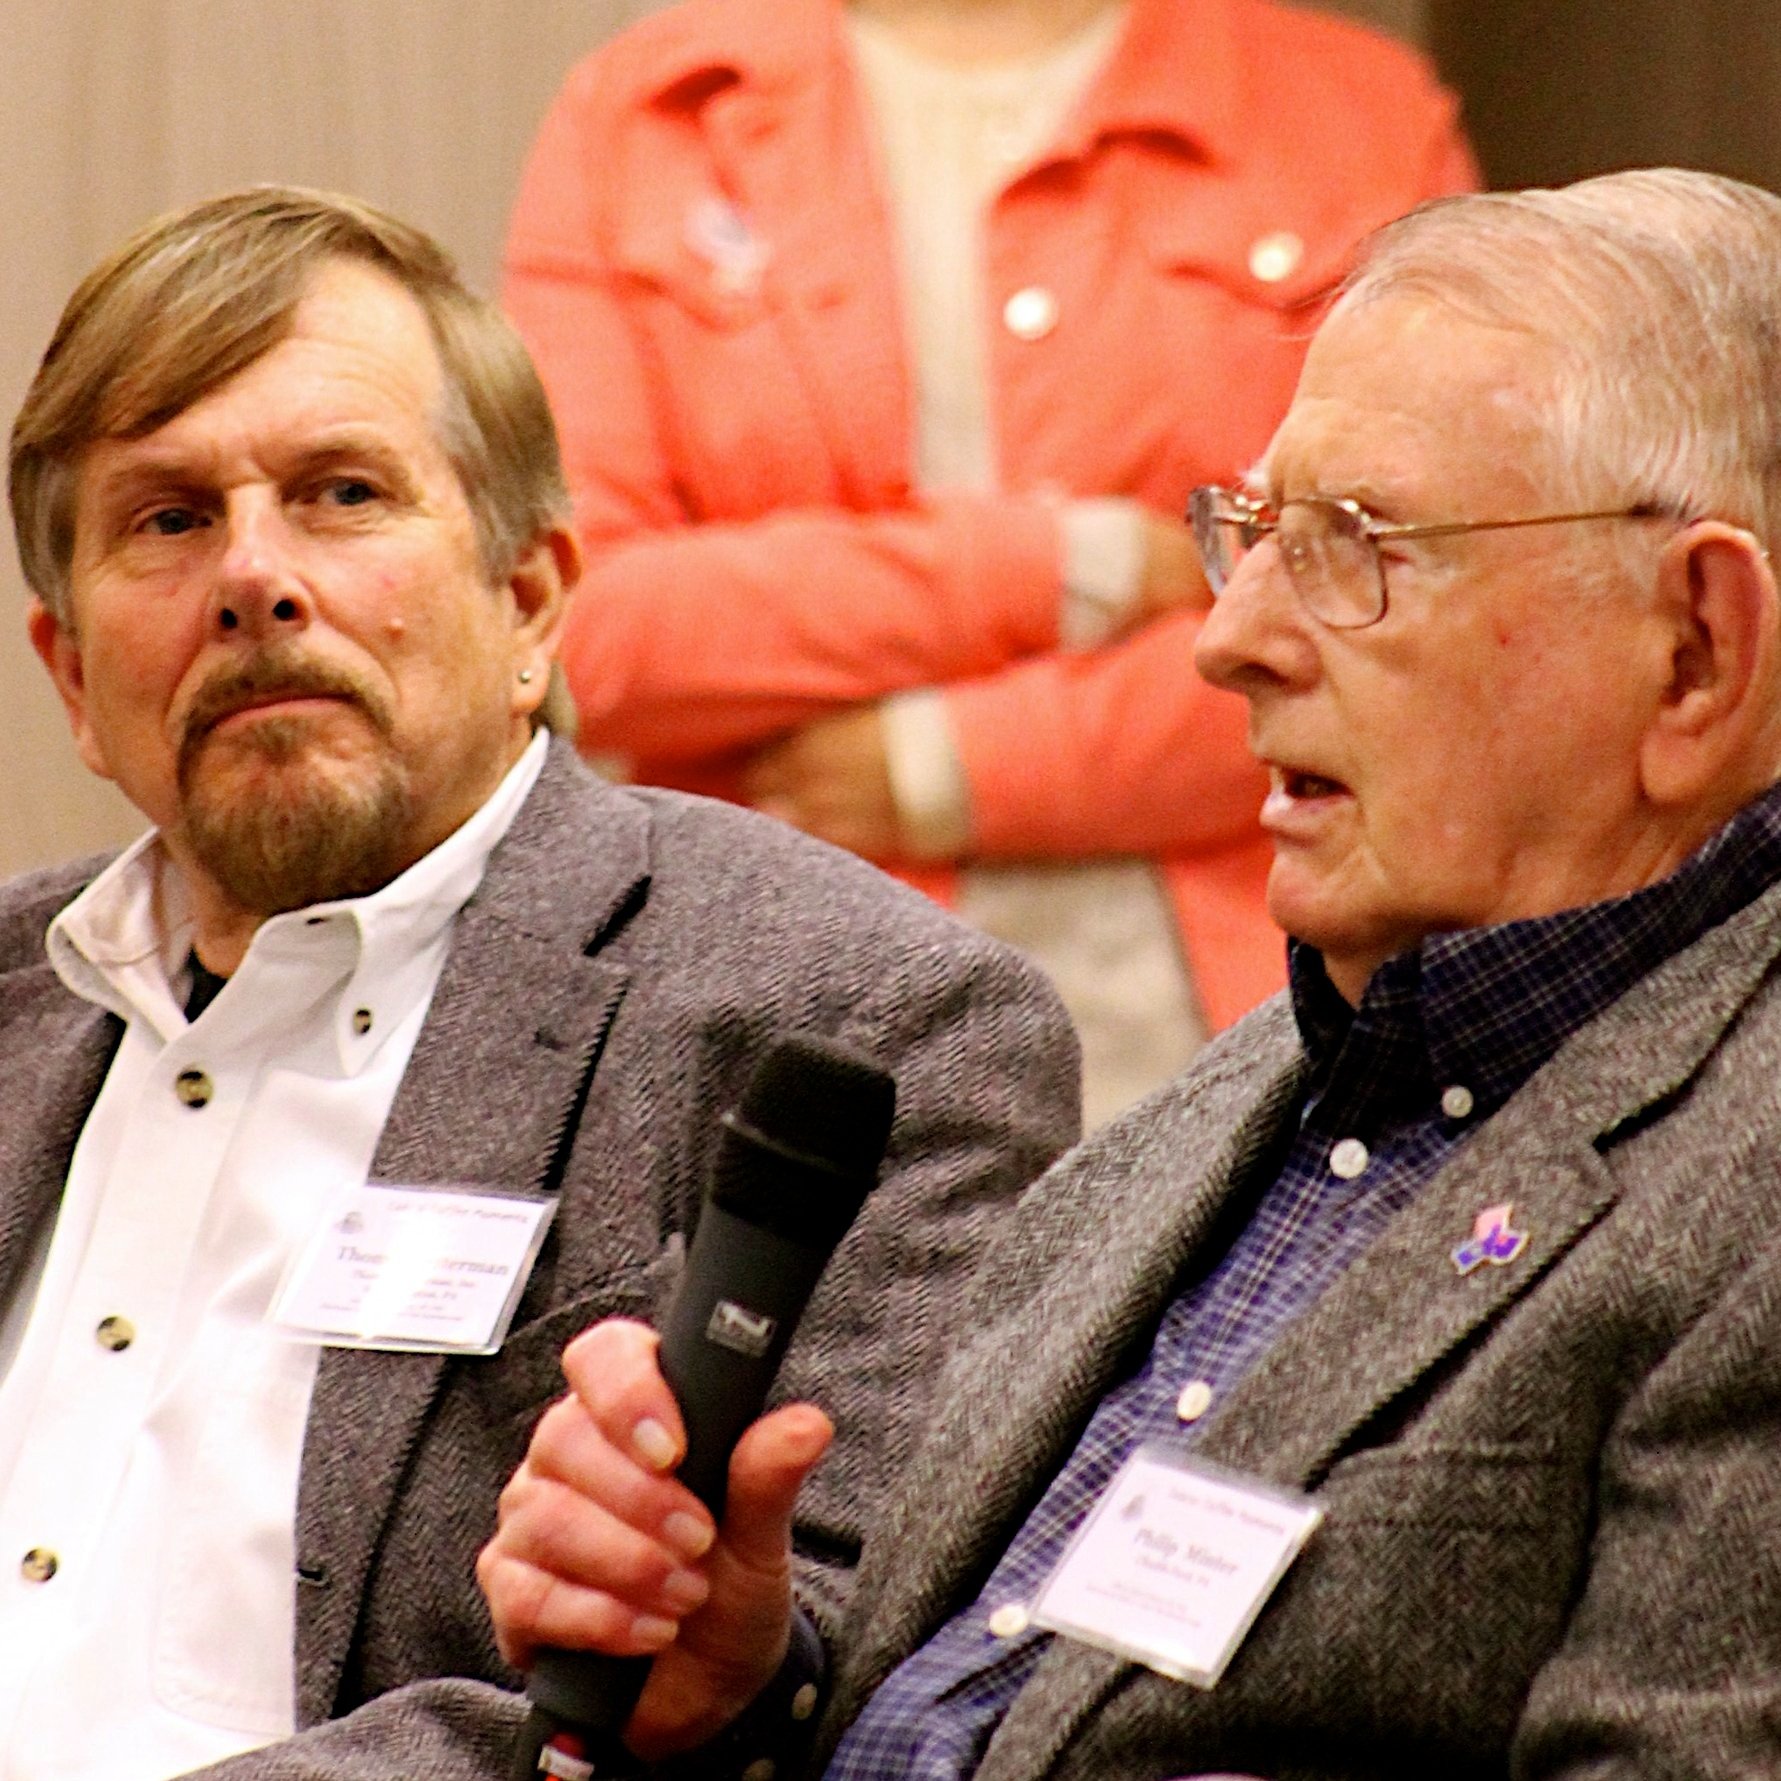 Tom with survivor Philip Minter at a Conference - 2015